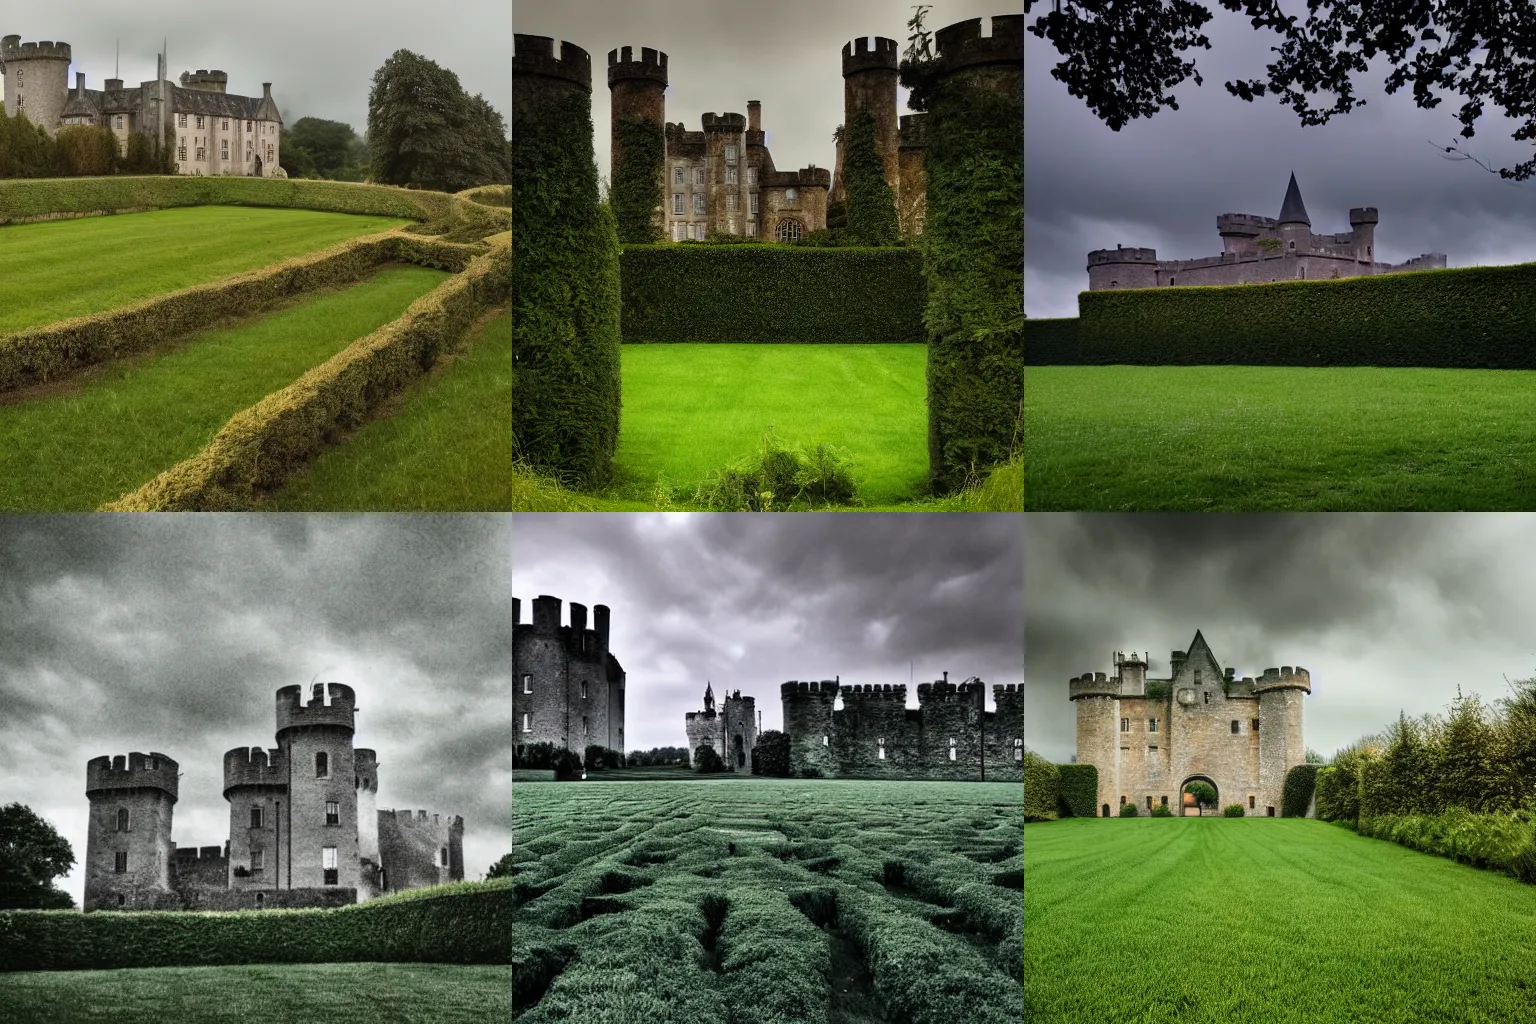 Prompt: field with 2 large hedges and a deep swimming pool between them, a castle in the background, creepy, overcast sky, haunting dream imagery